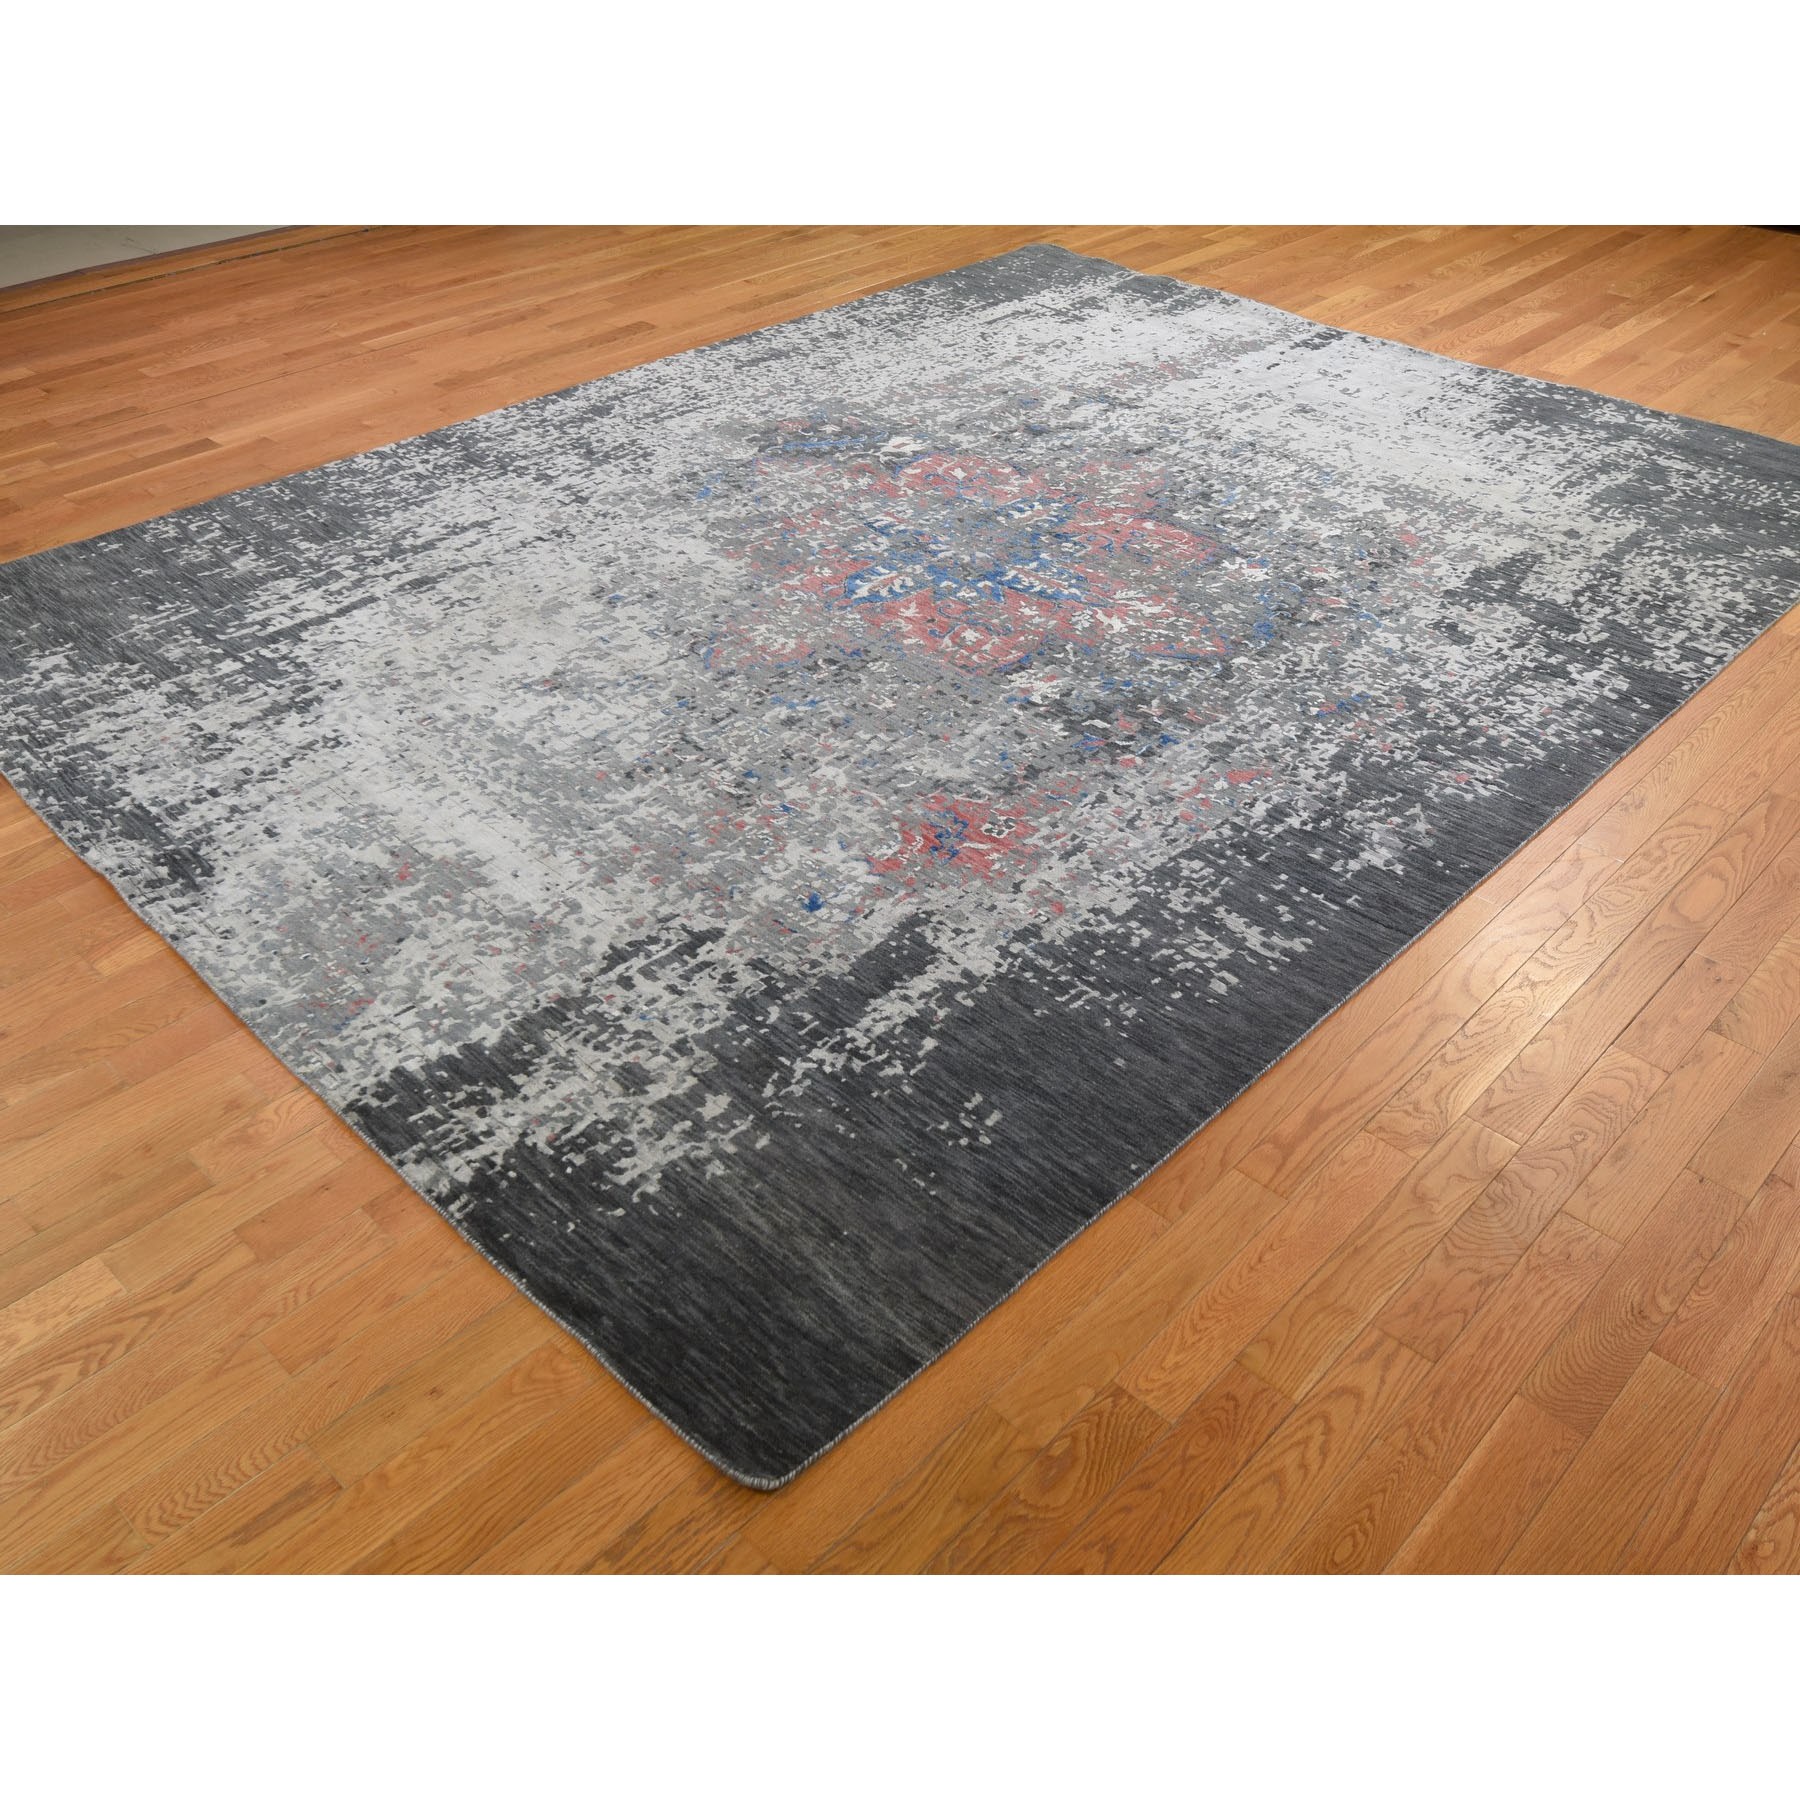 9-2 x12- Gray Wool And Silk Broken Persian Design Hand Knotted Oriental Rug 